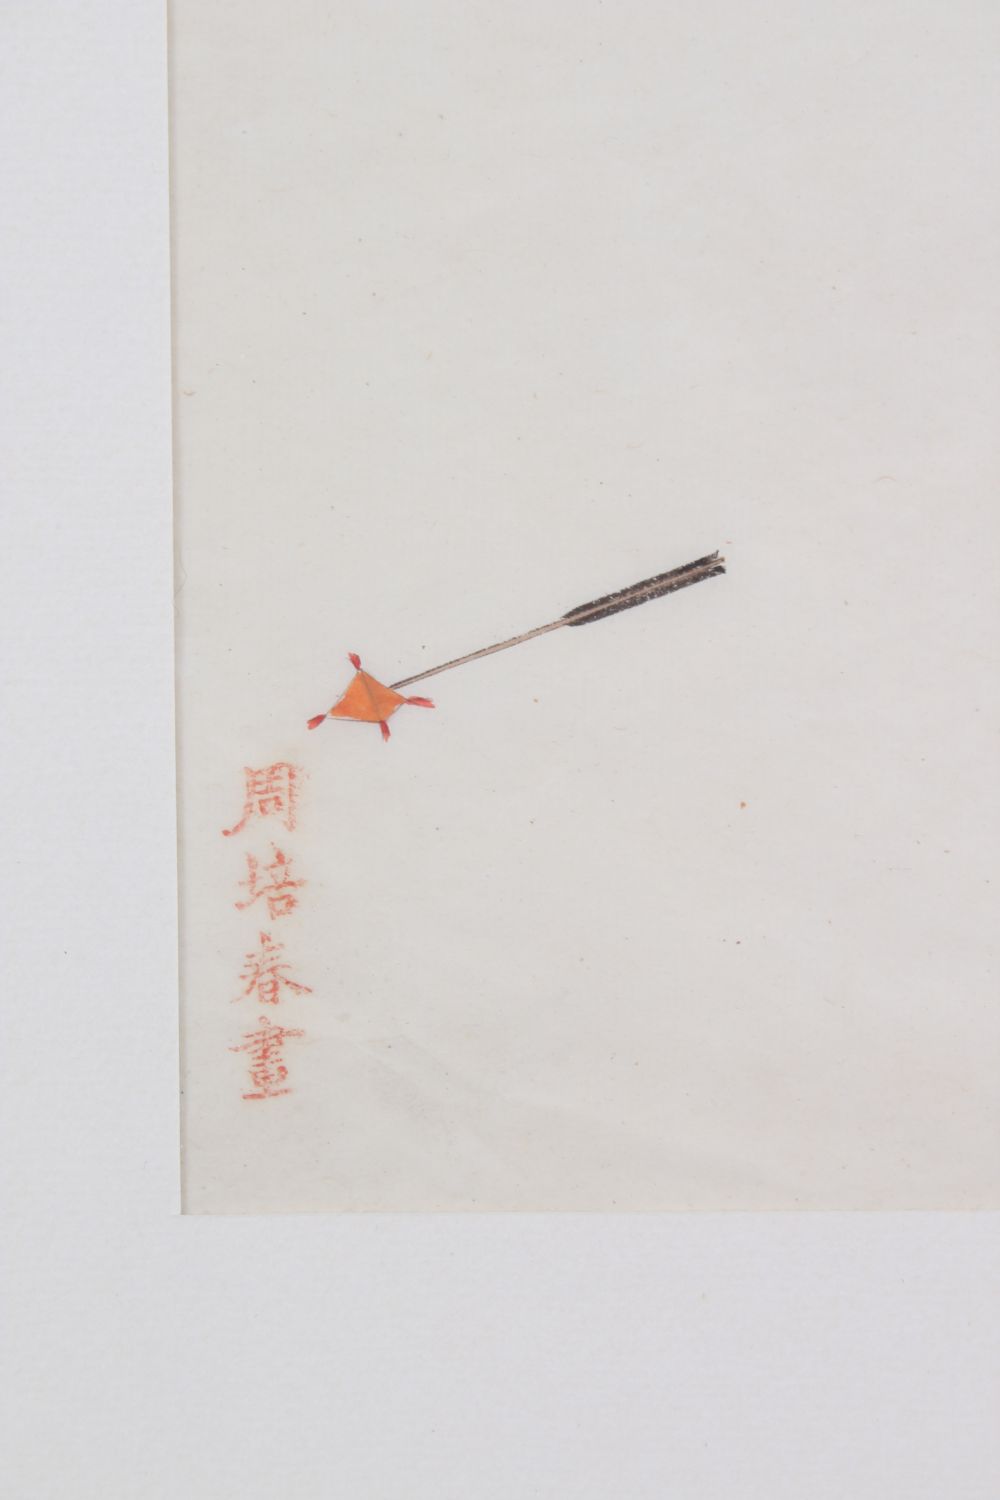 TWO 19TH CENTURY CHINESE PAINTINGS ON PAPER - HORSES & ACTORS, the pictures depicting a figure on - Image 9 of 9